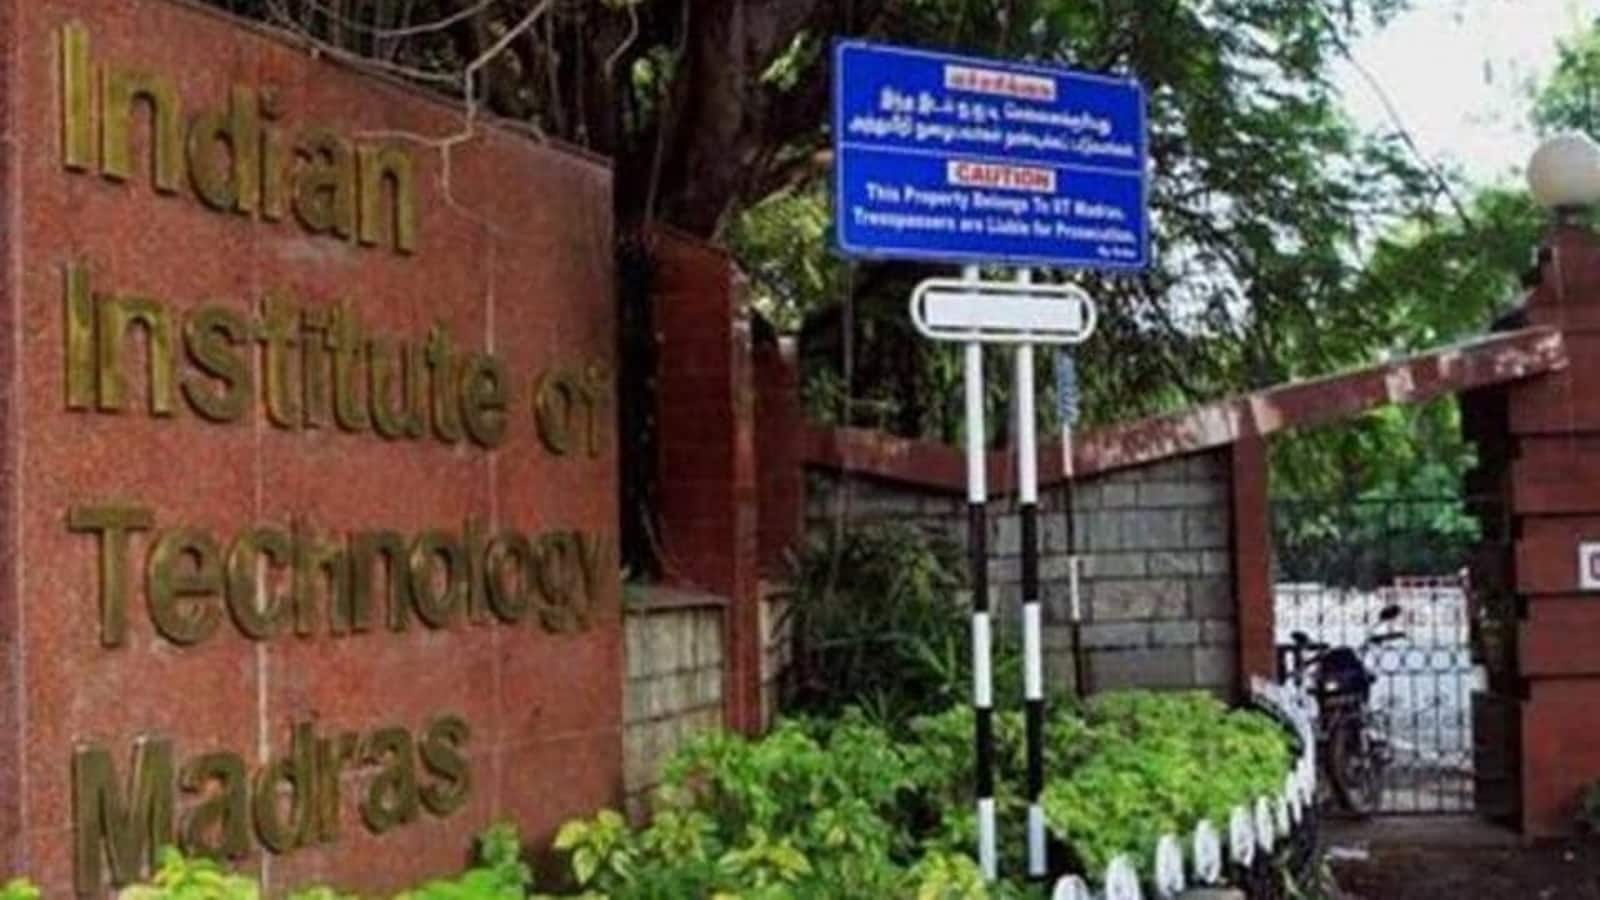 JEE not required, apply for Programming & Data Science course at IIT Madras